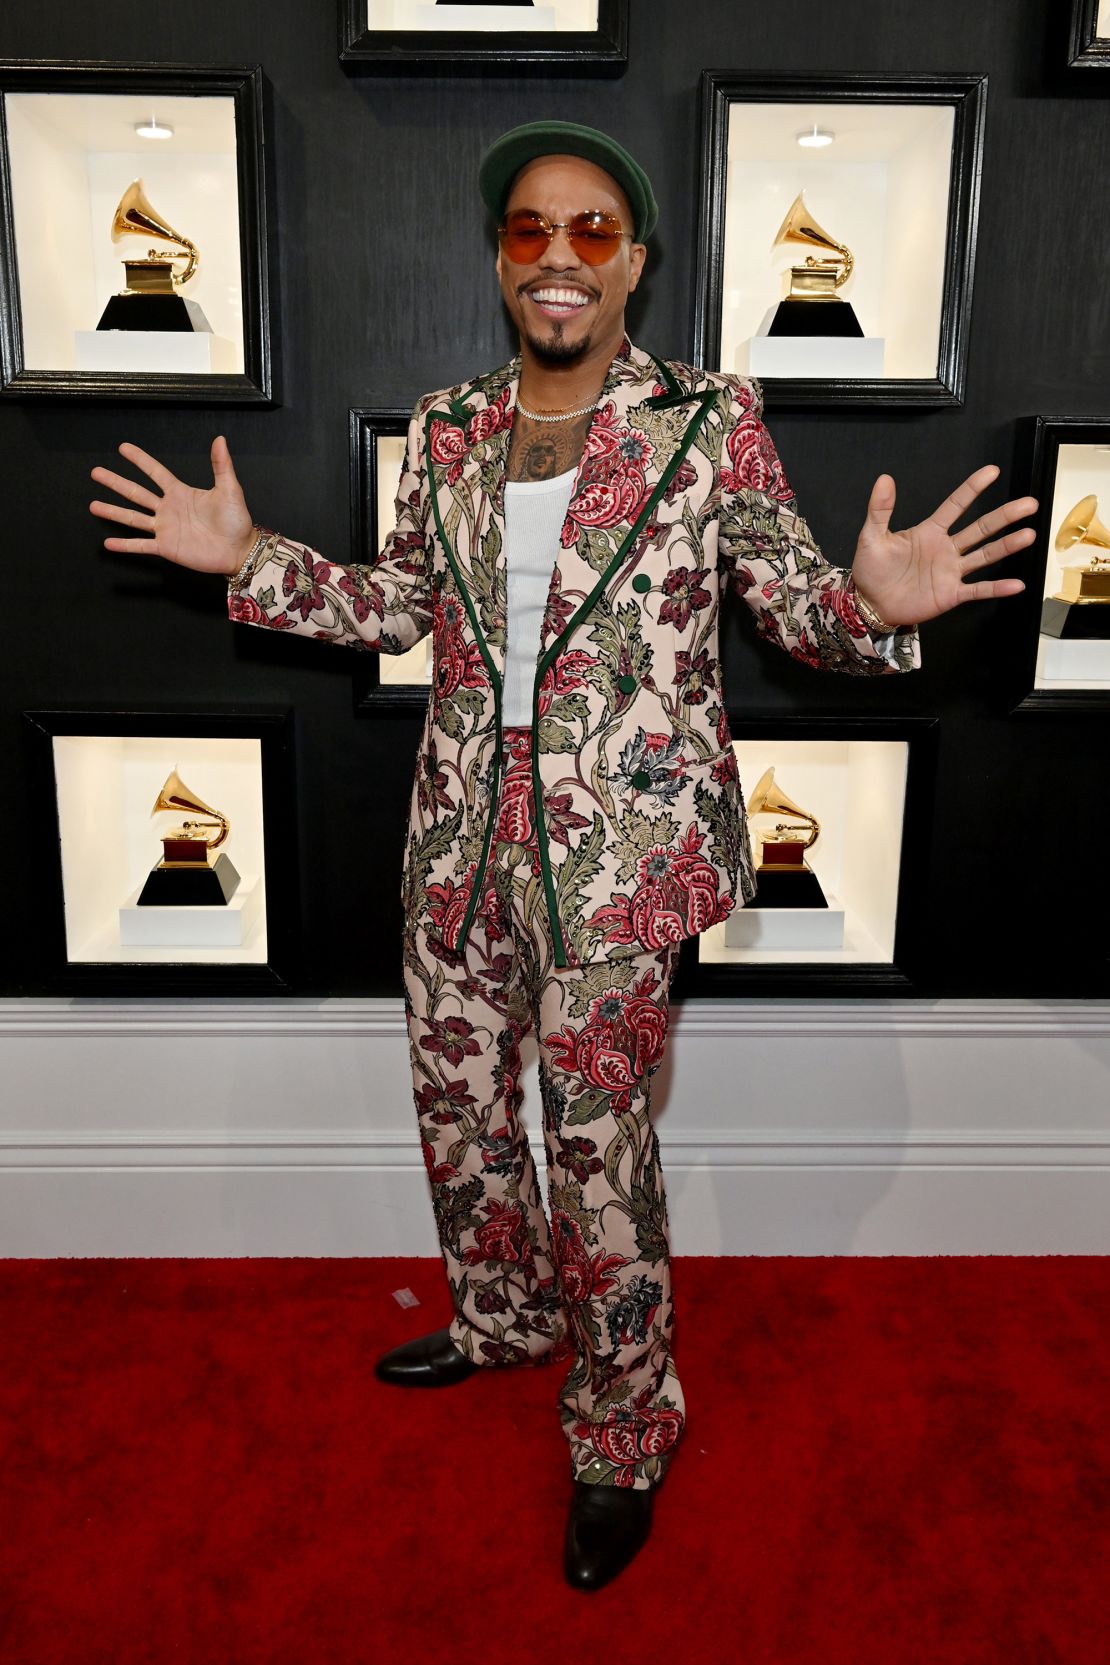 Anderson Paak impressed in a floral suit.